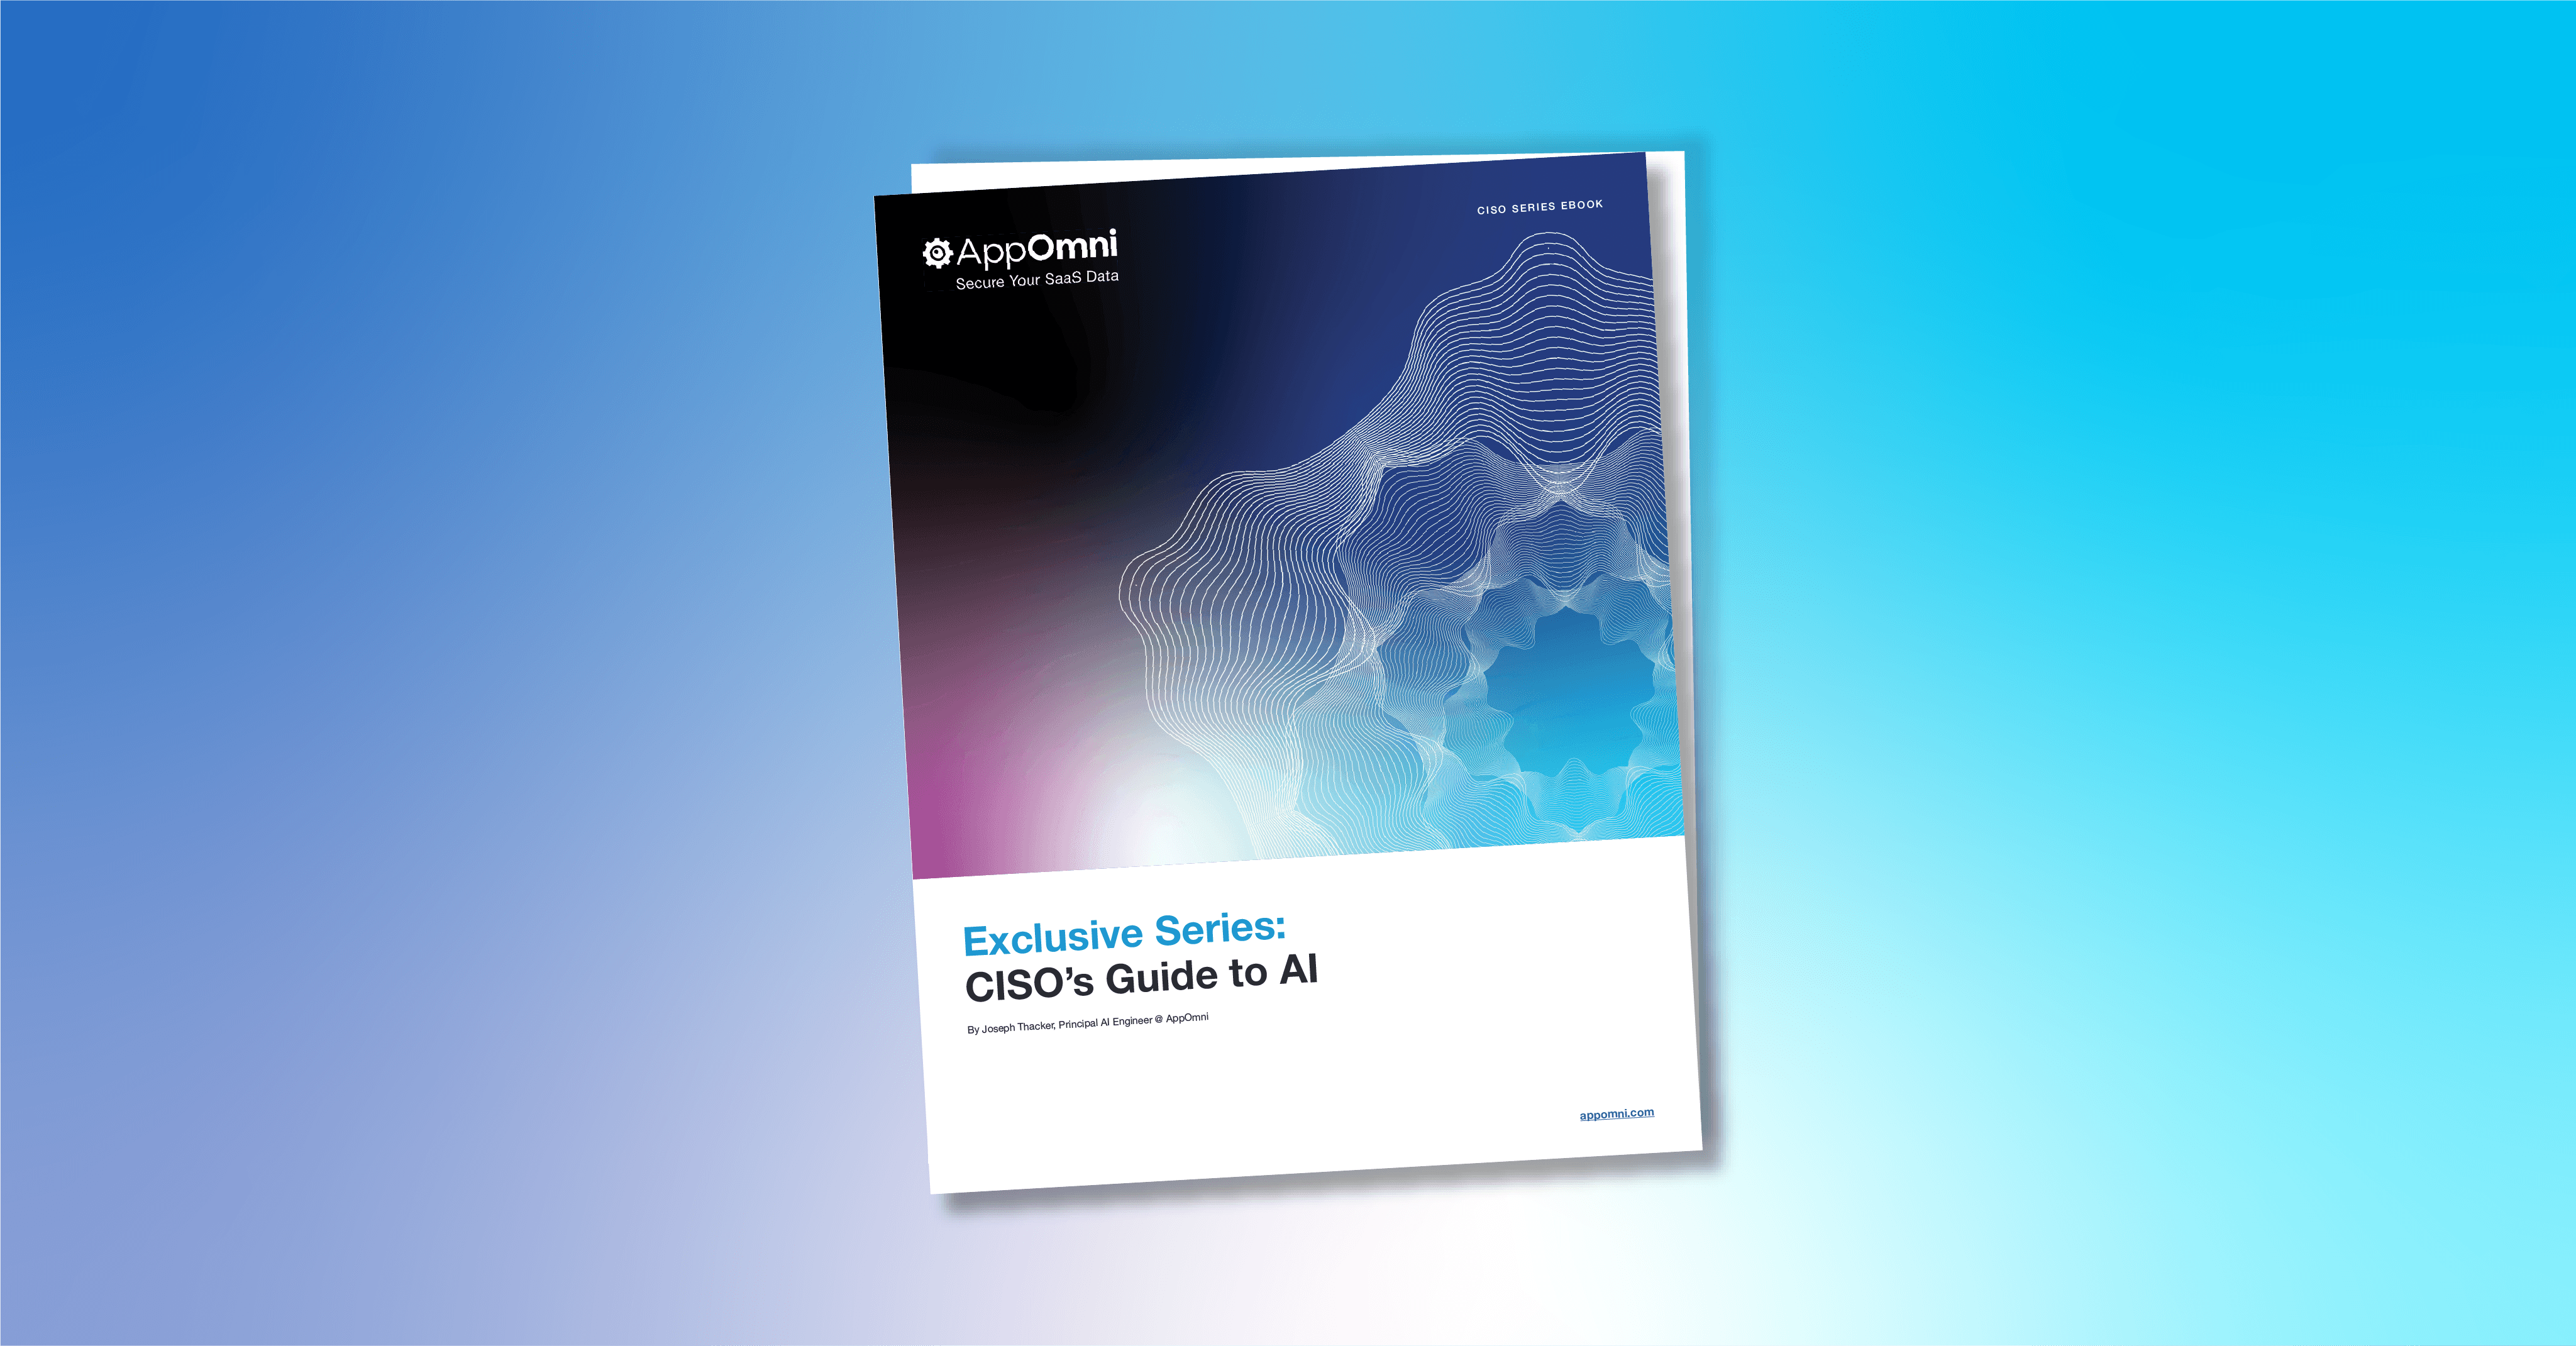 Exclusive Series: CISO’s Guide to AI